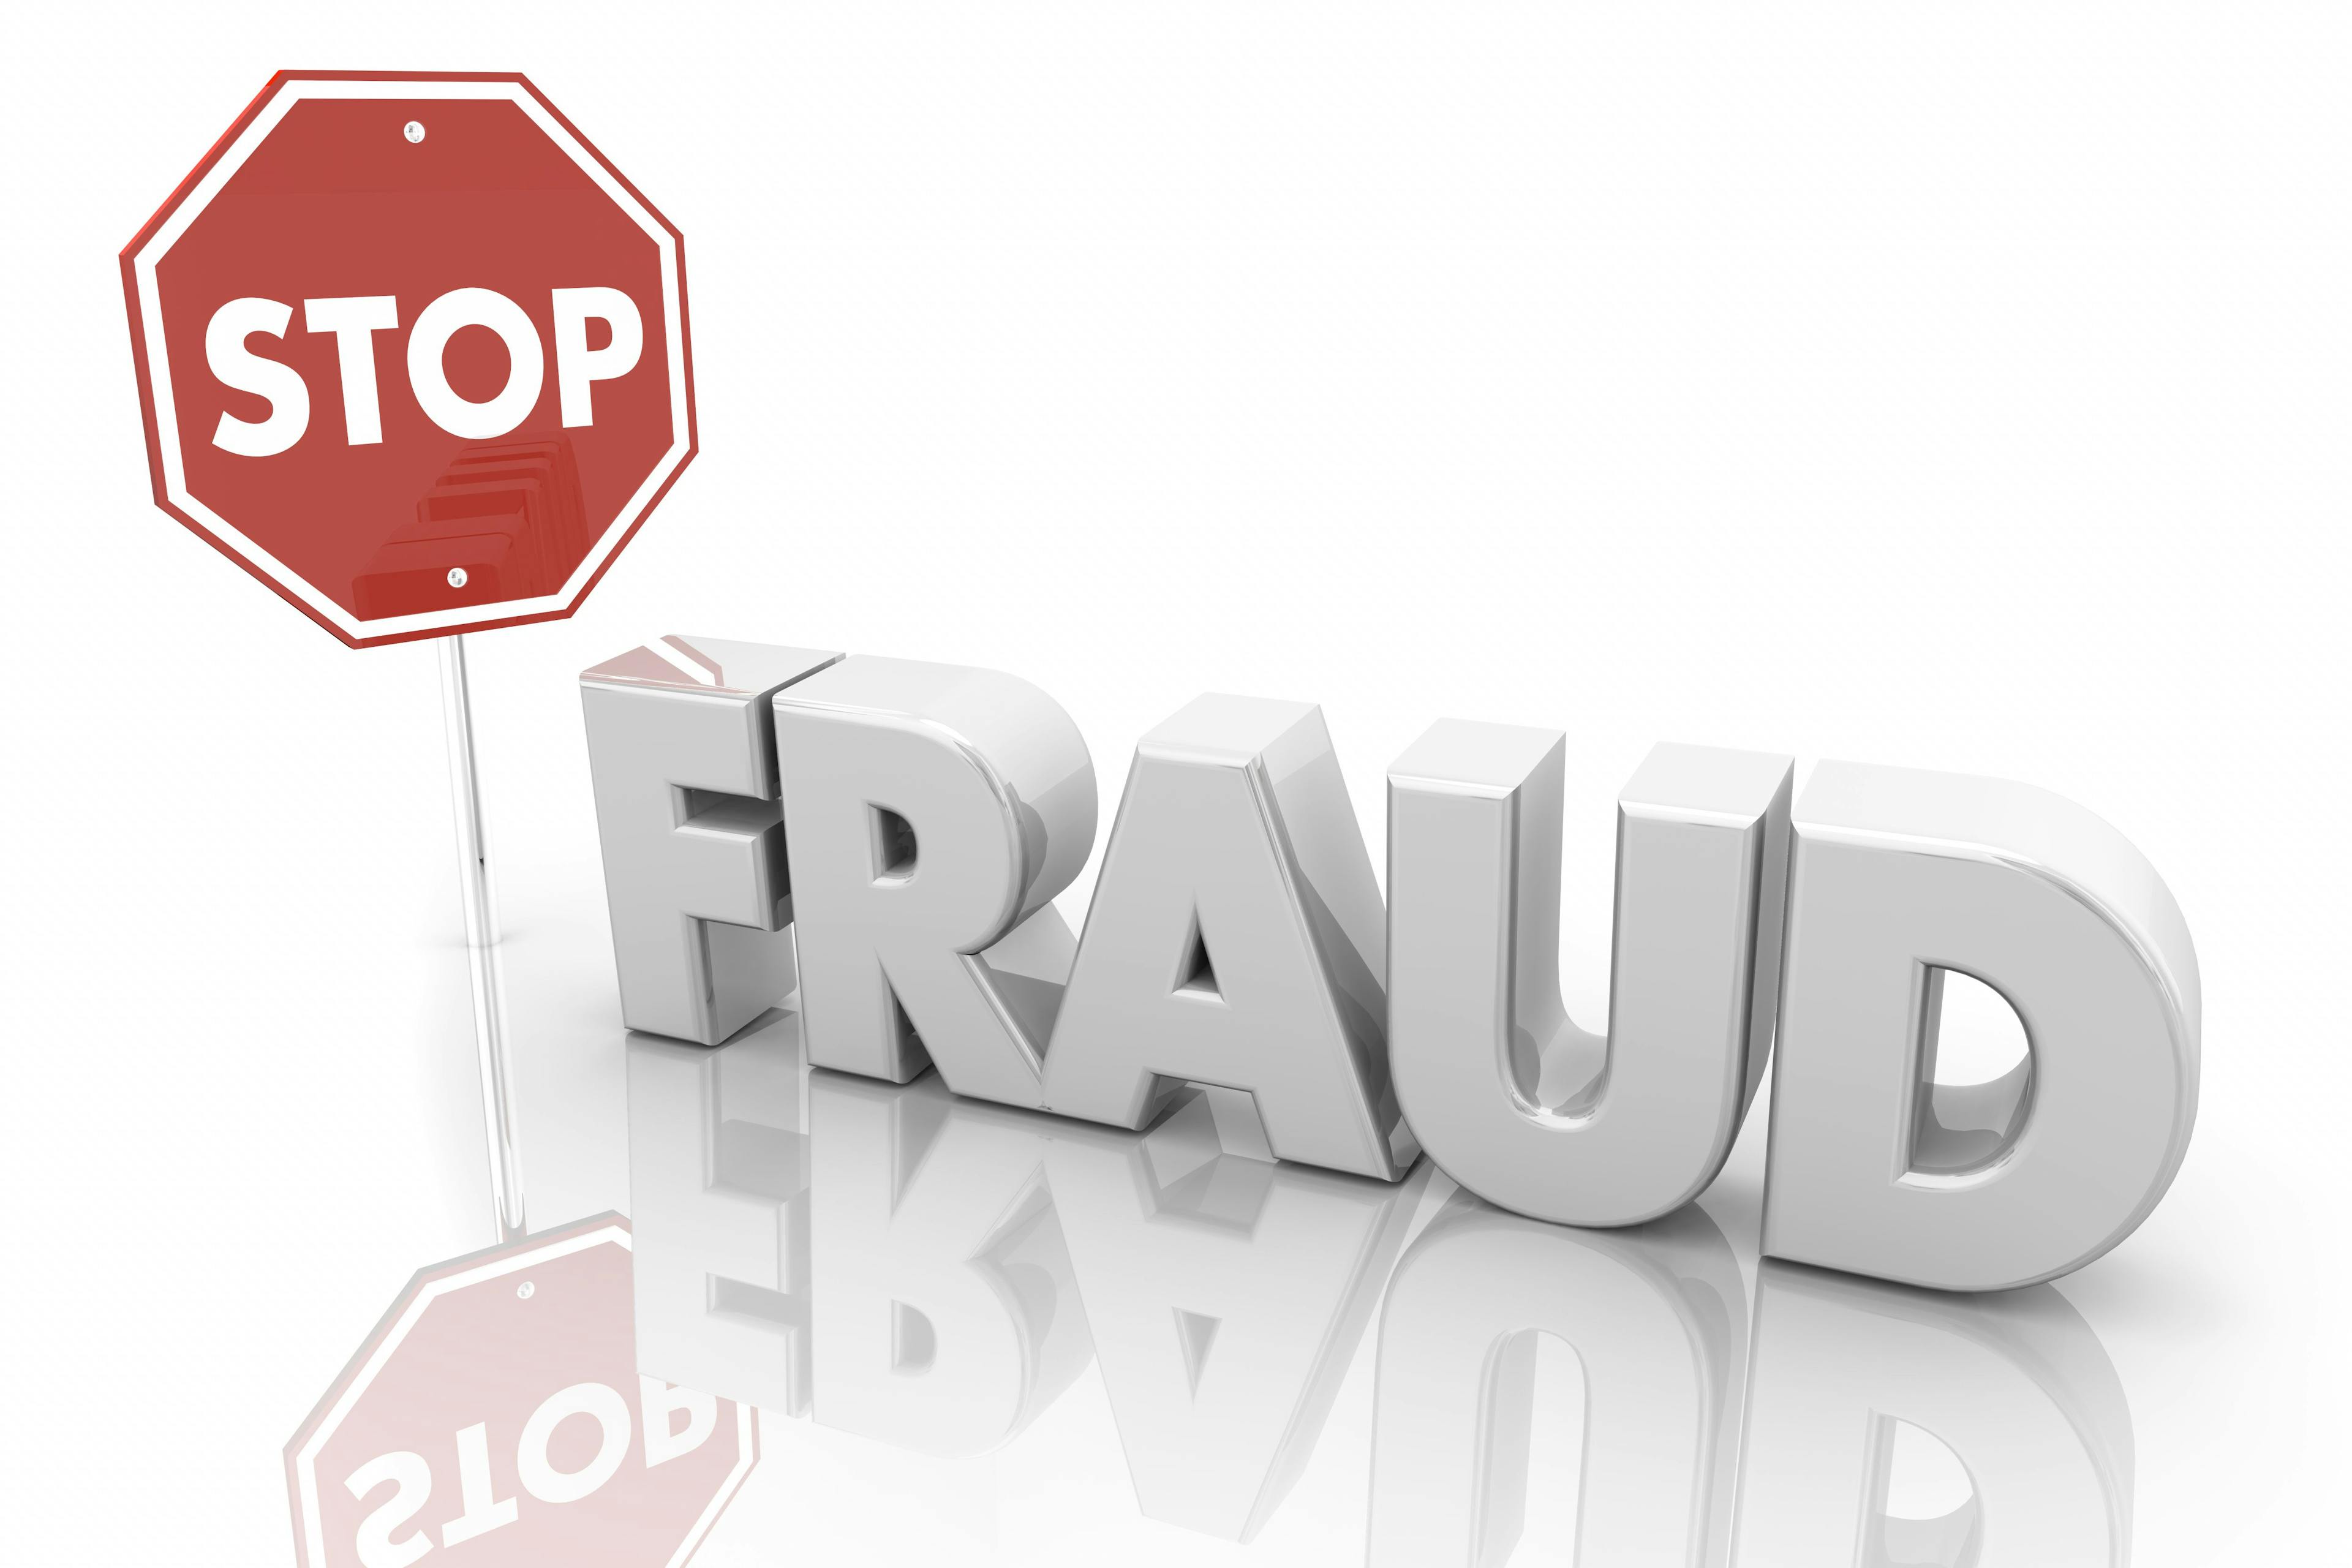  How to avoid getting pulled into healthcare fraud